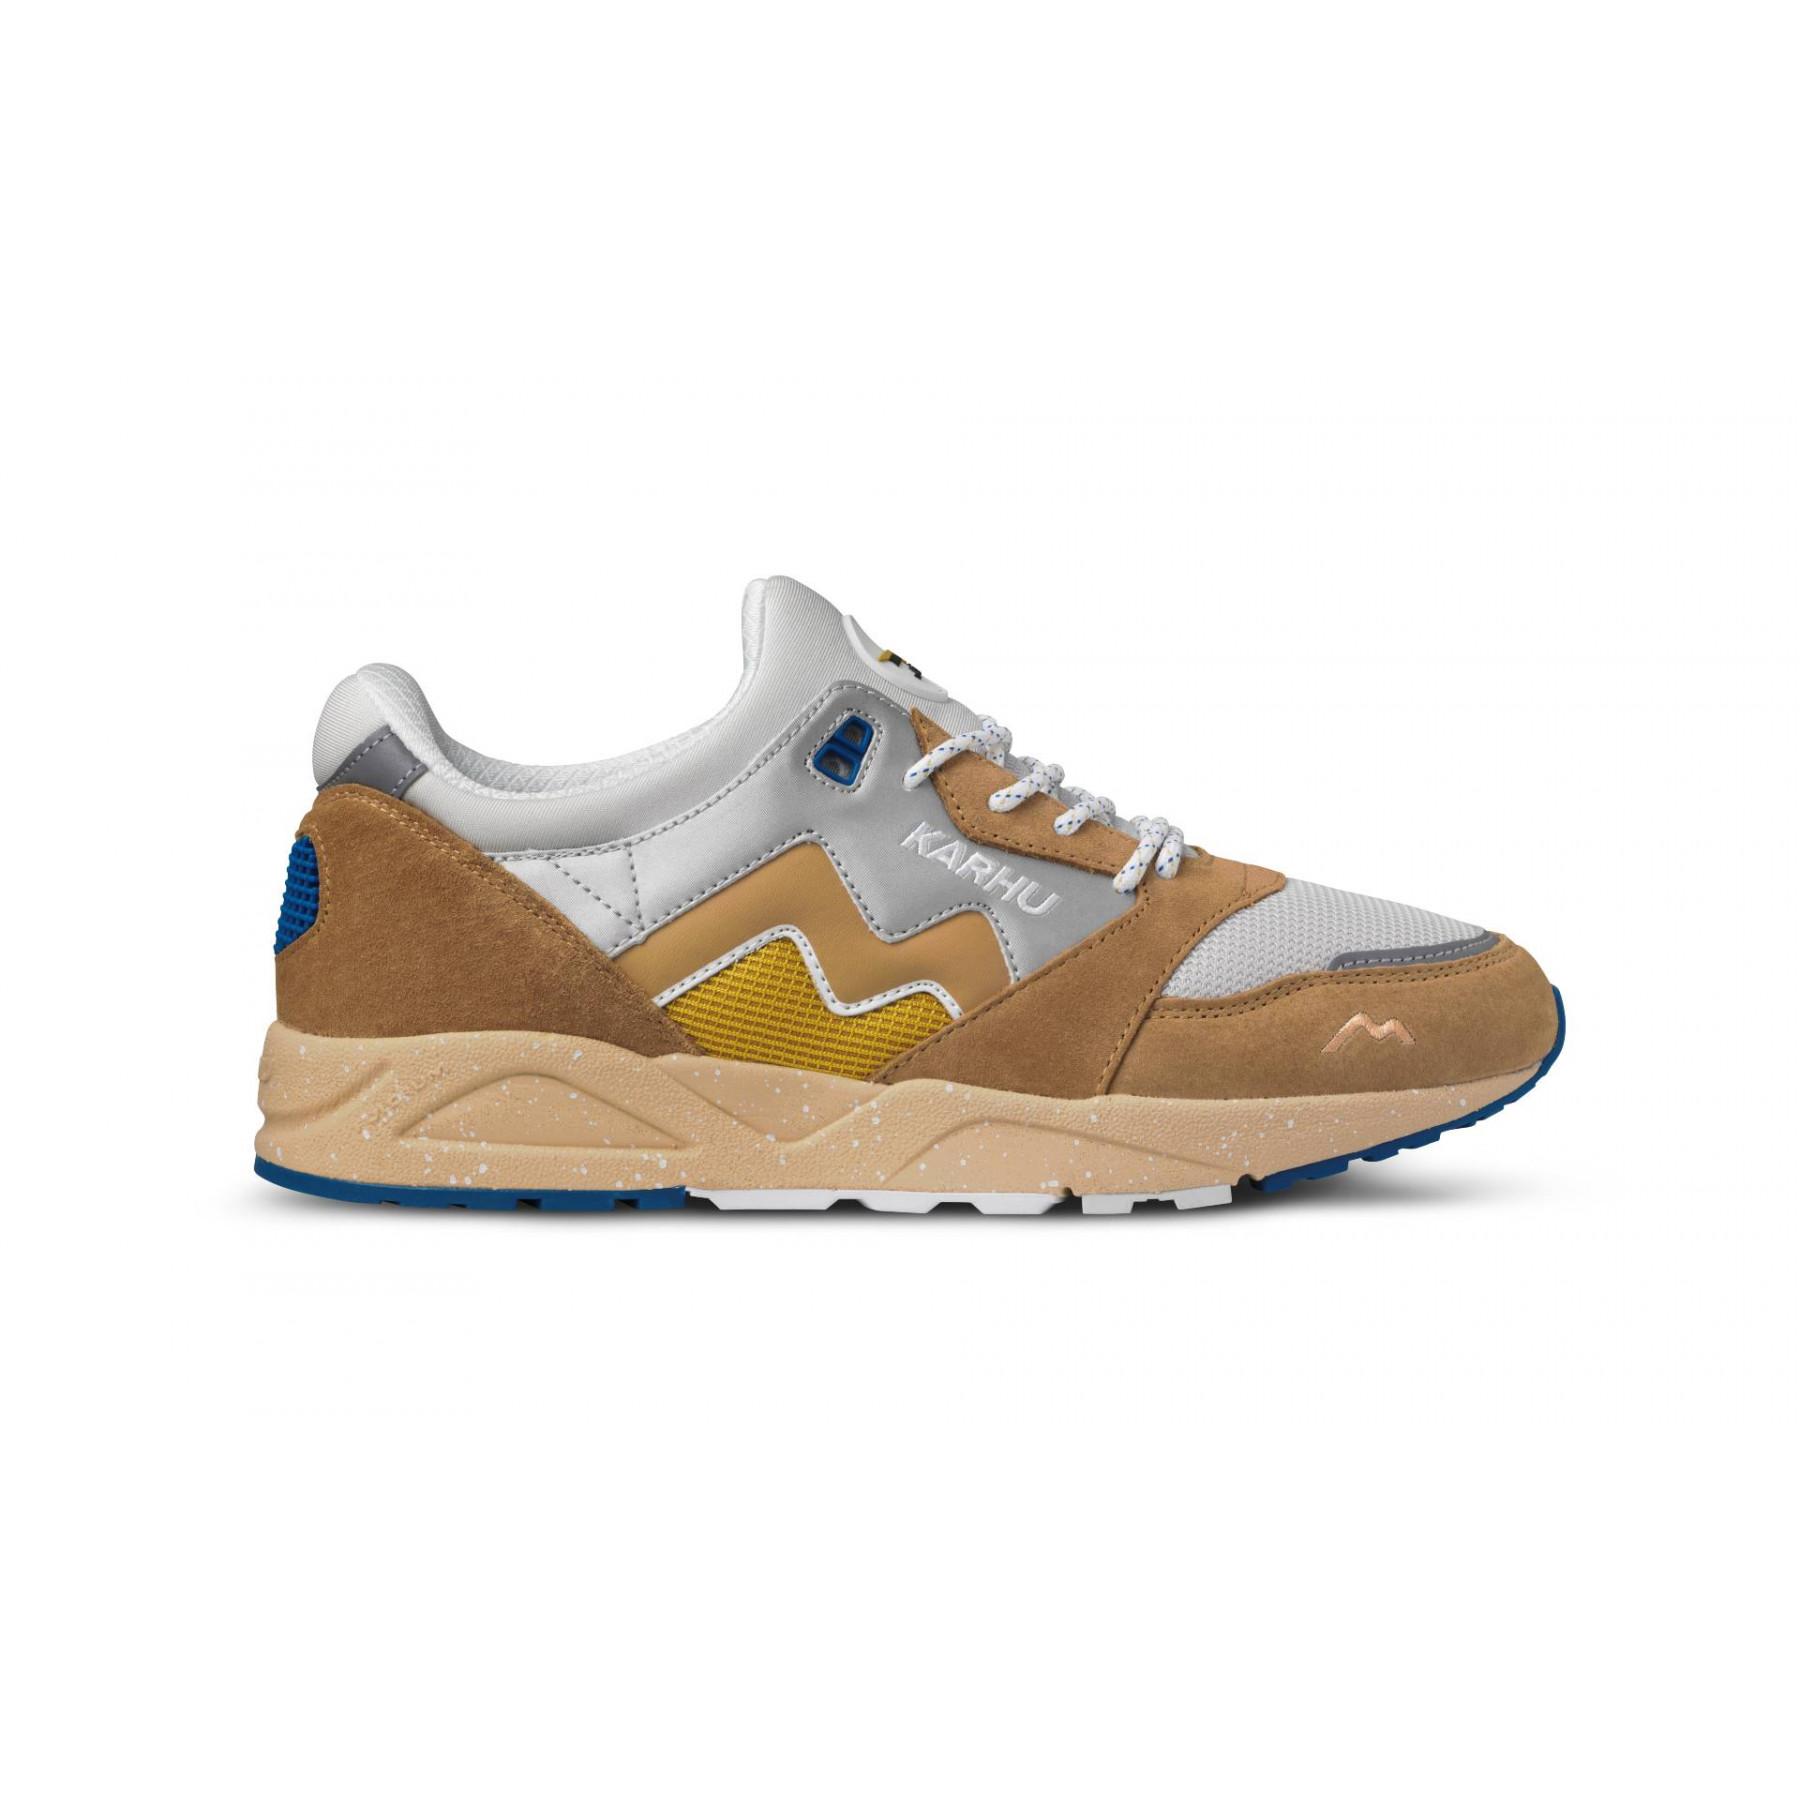 Sneakers Karhu Aria Curry Golden Palm - F803070